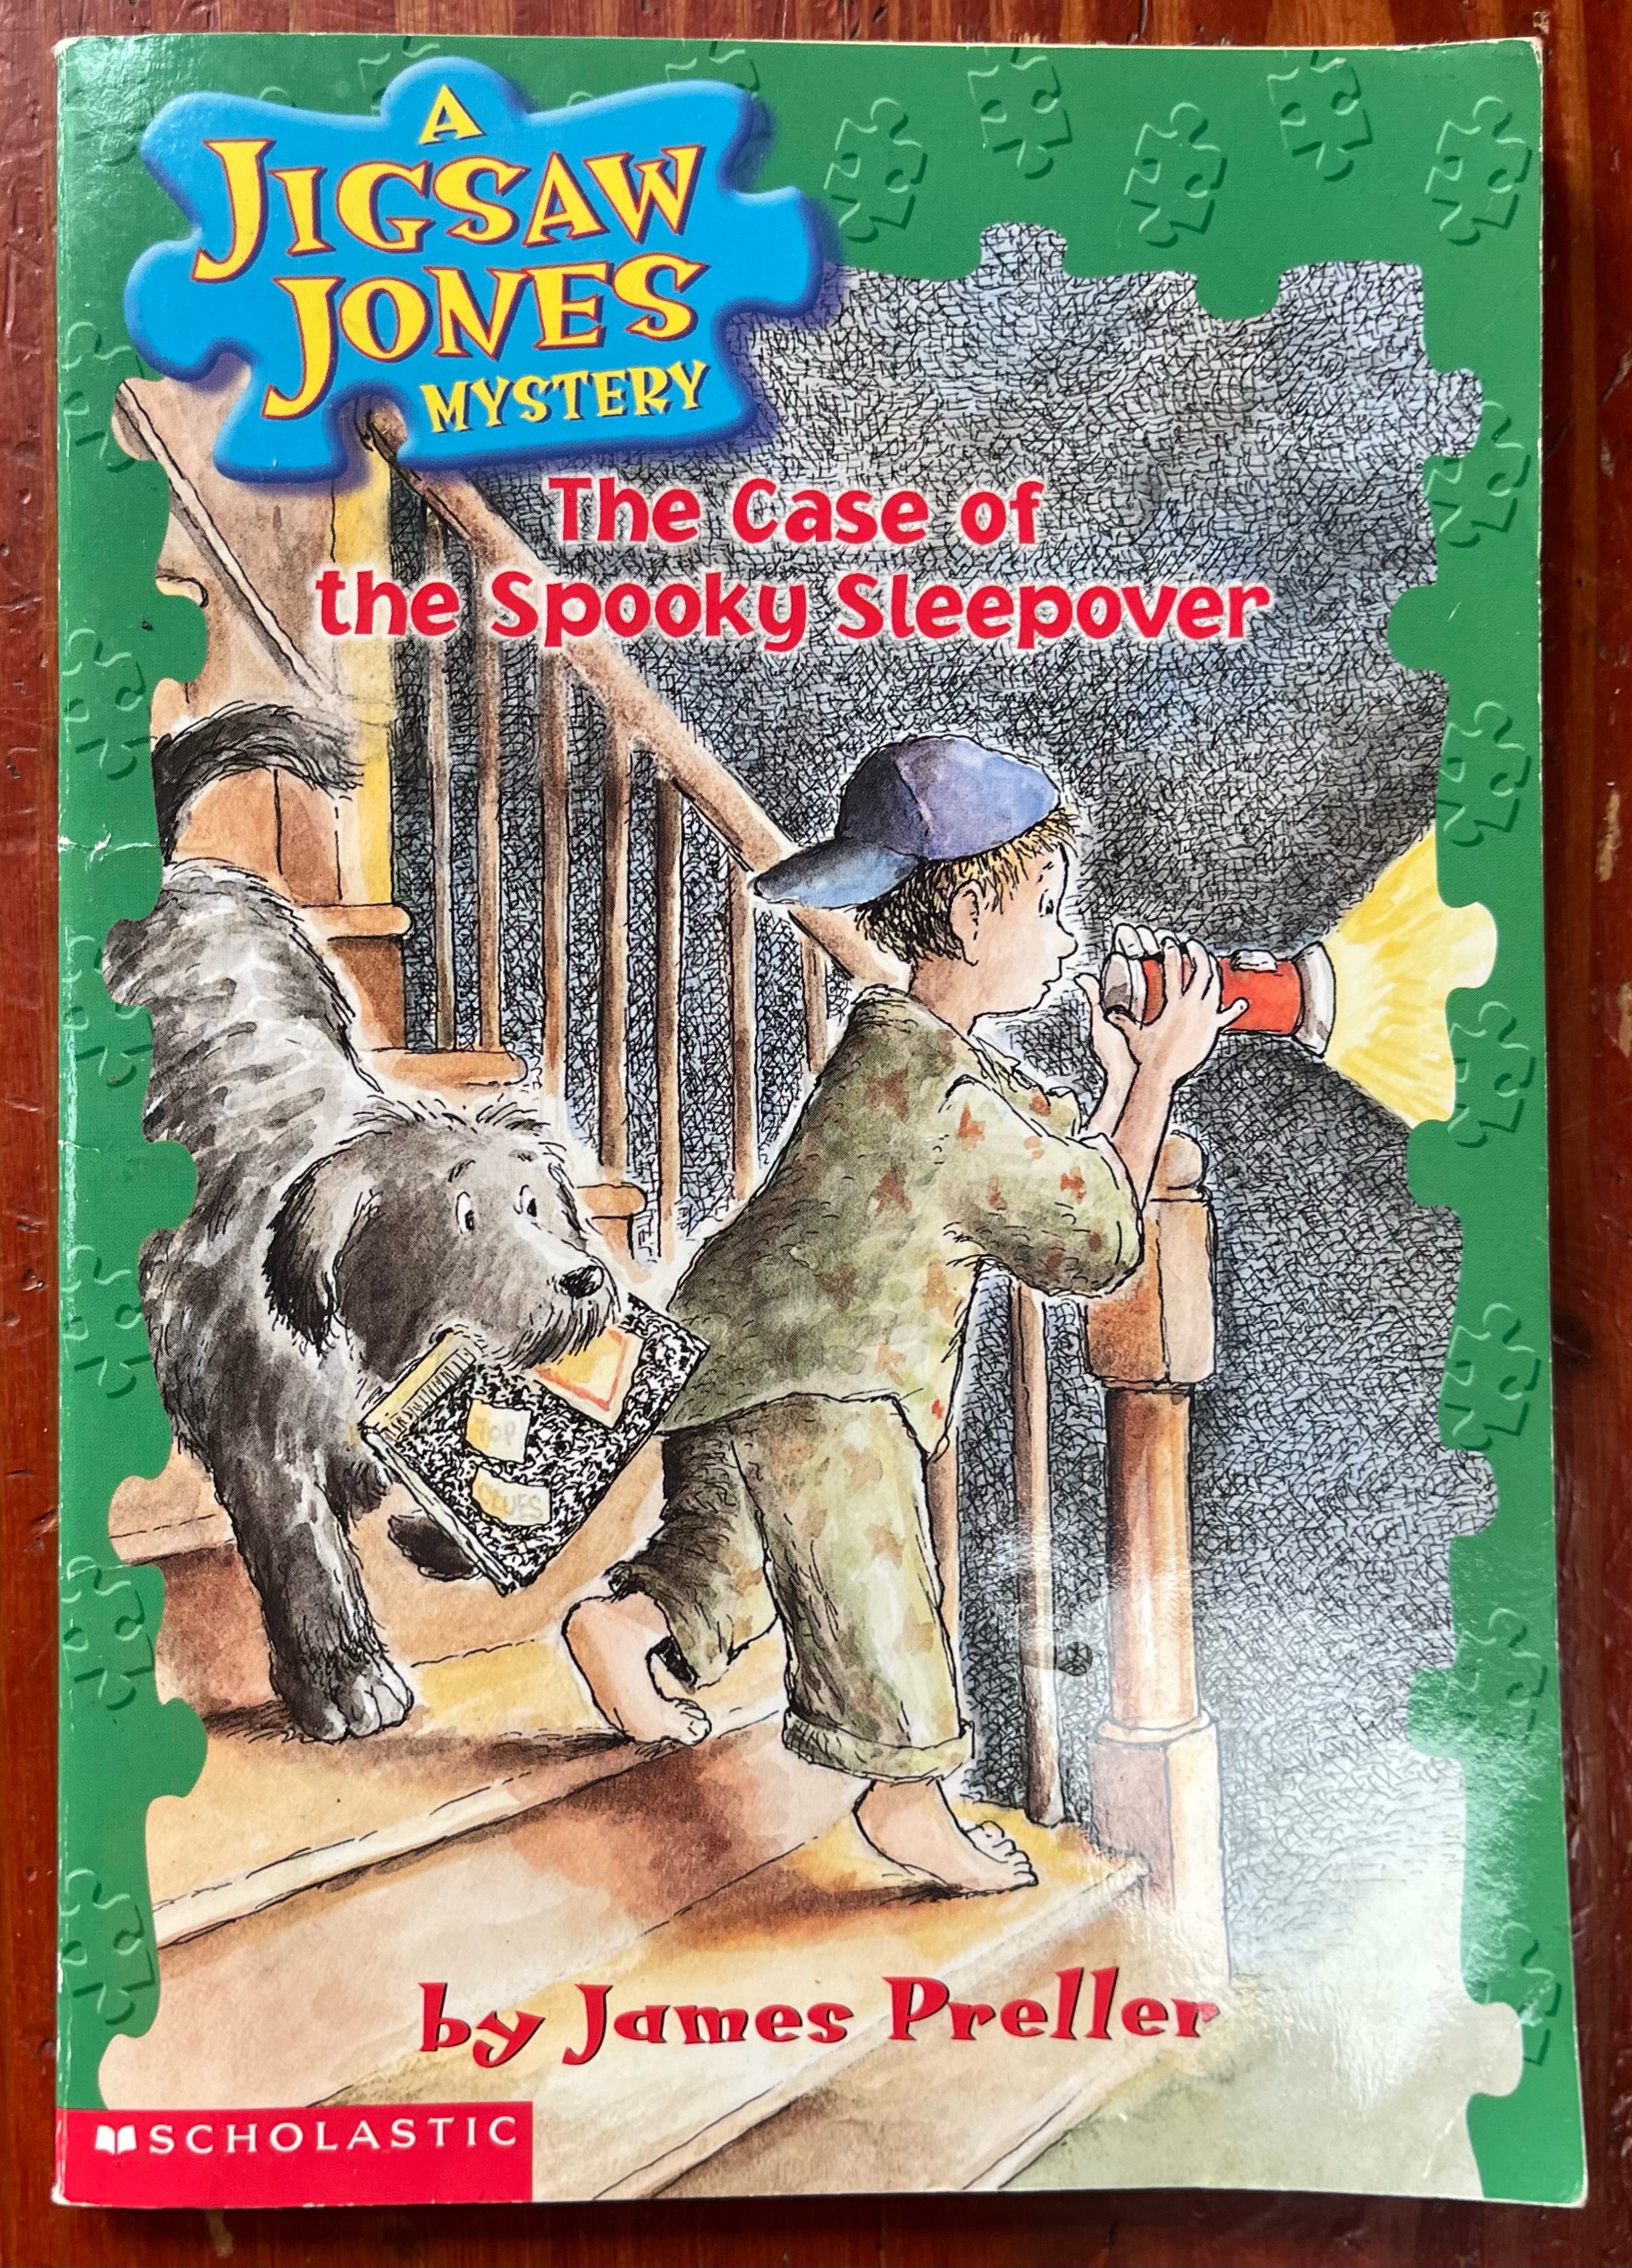 Jigsaw Jones Mystery: The Case of the Spooky Sleepover by James Preller book cover easy chapter books for kids